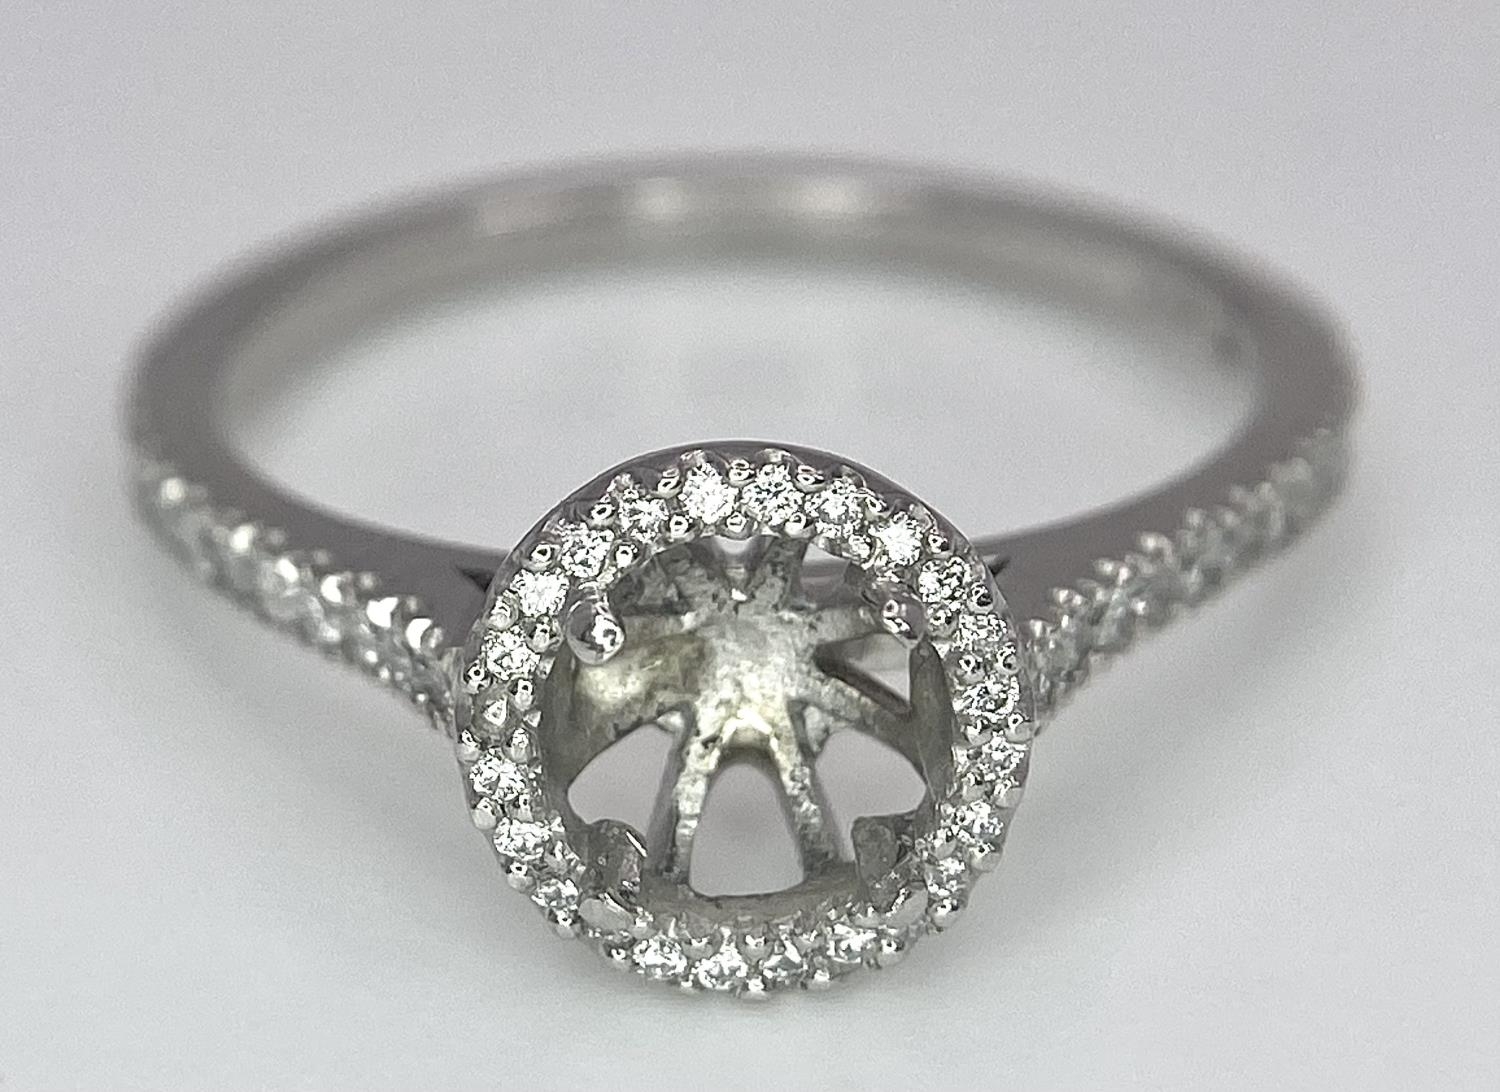 A PLATINUM DIAMOND SET HALO AND SHOULDERS RING MOUNT 0.40CT, READY TO SET YOUR DREAM GEMSTONE 4.3G - Image 4 of 6